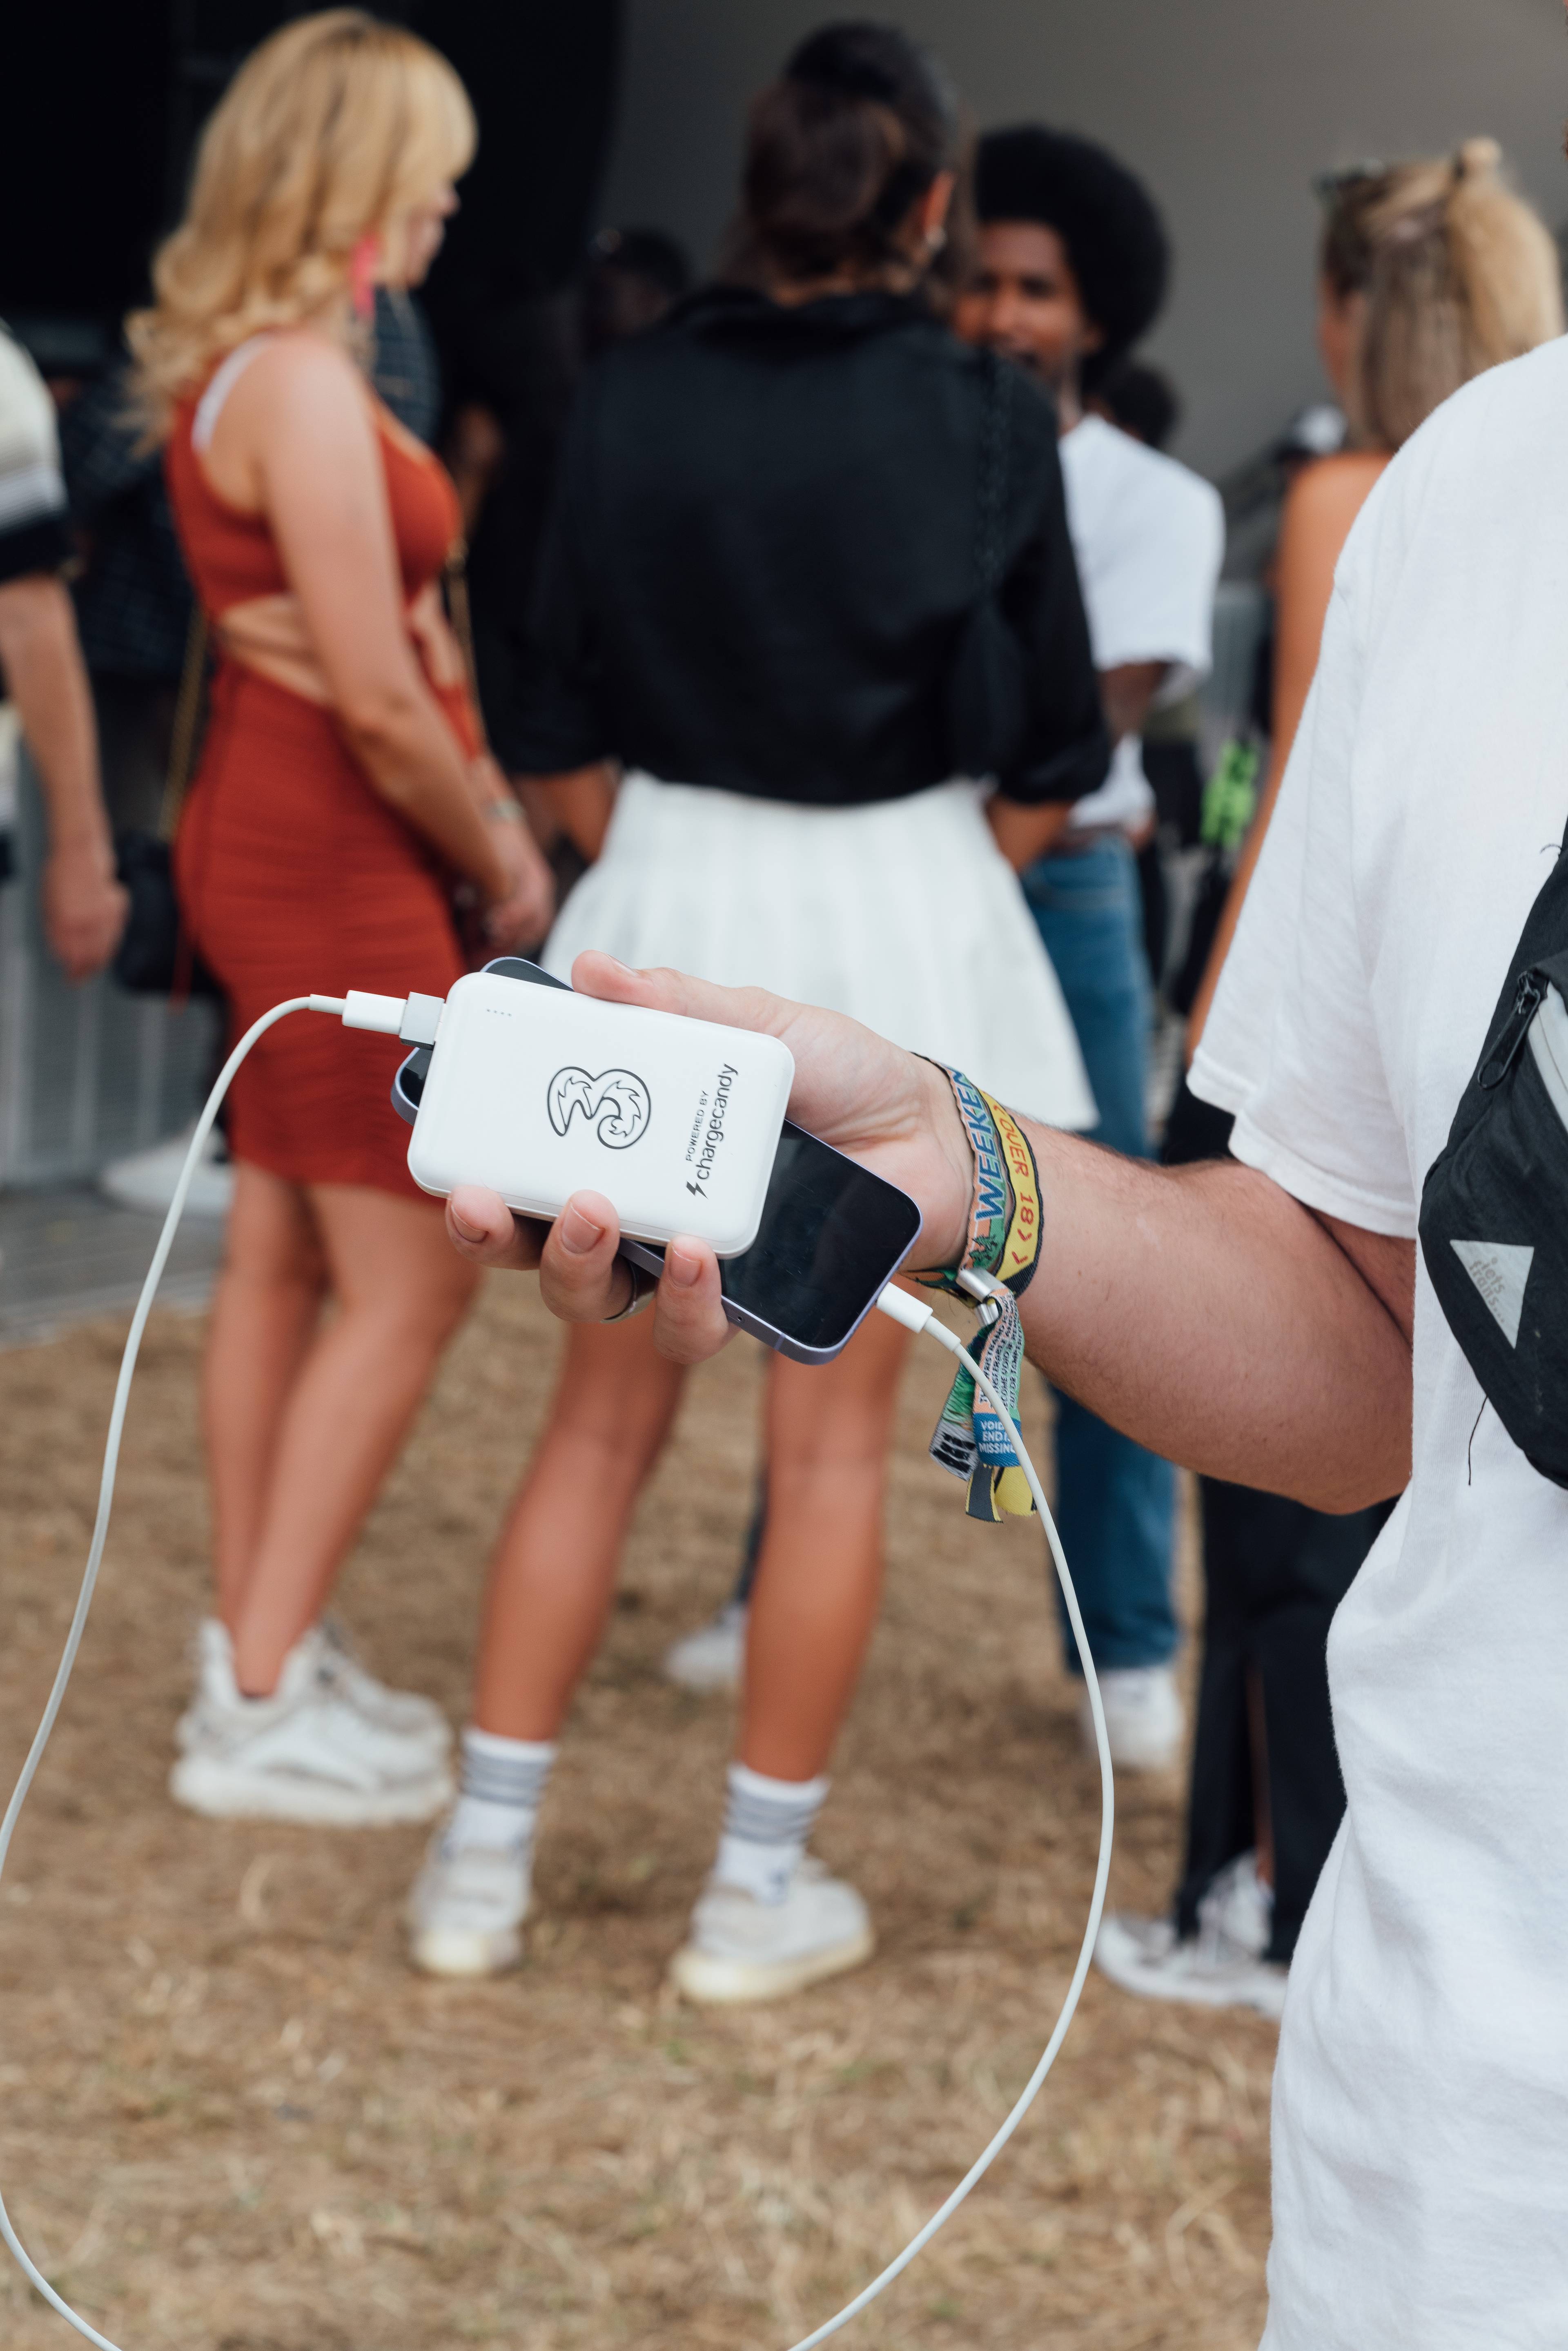 A person holding their phone attached to a portable charger